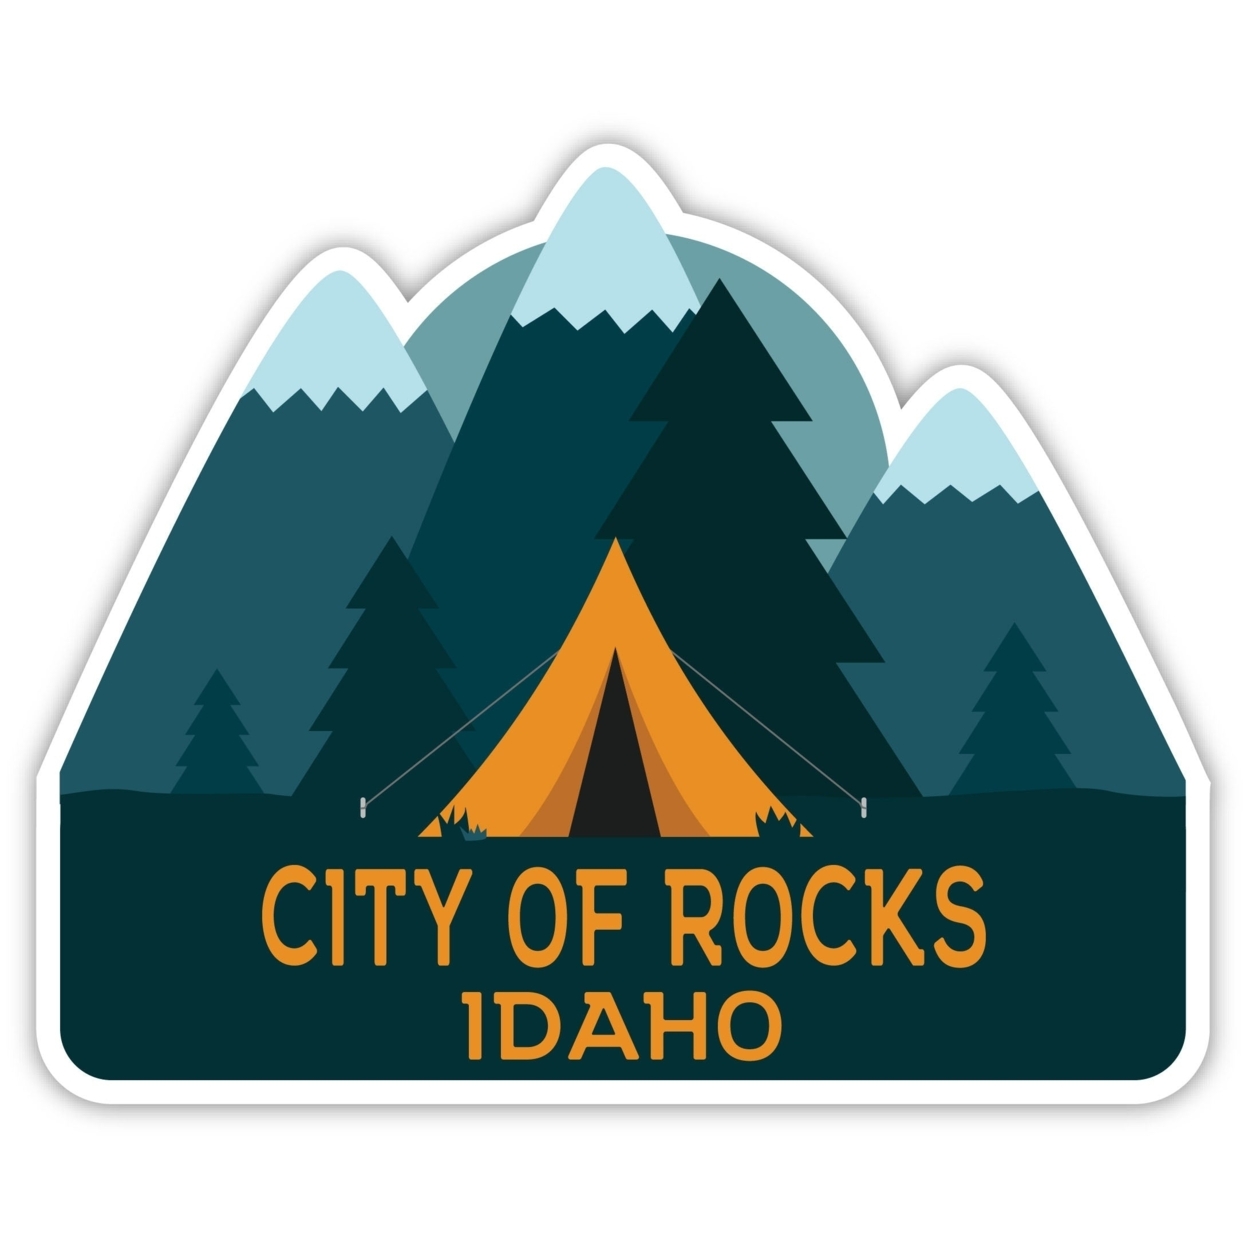 City Of Rocks Idaho Souvenir Decorative Stickers (Choose Theme And Size) - 4-Pack, 4-Inch, Bear